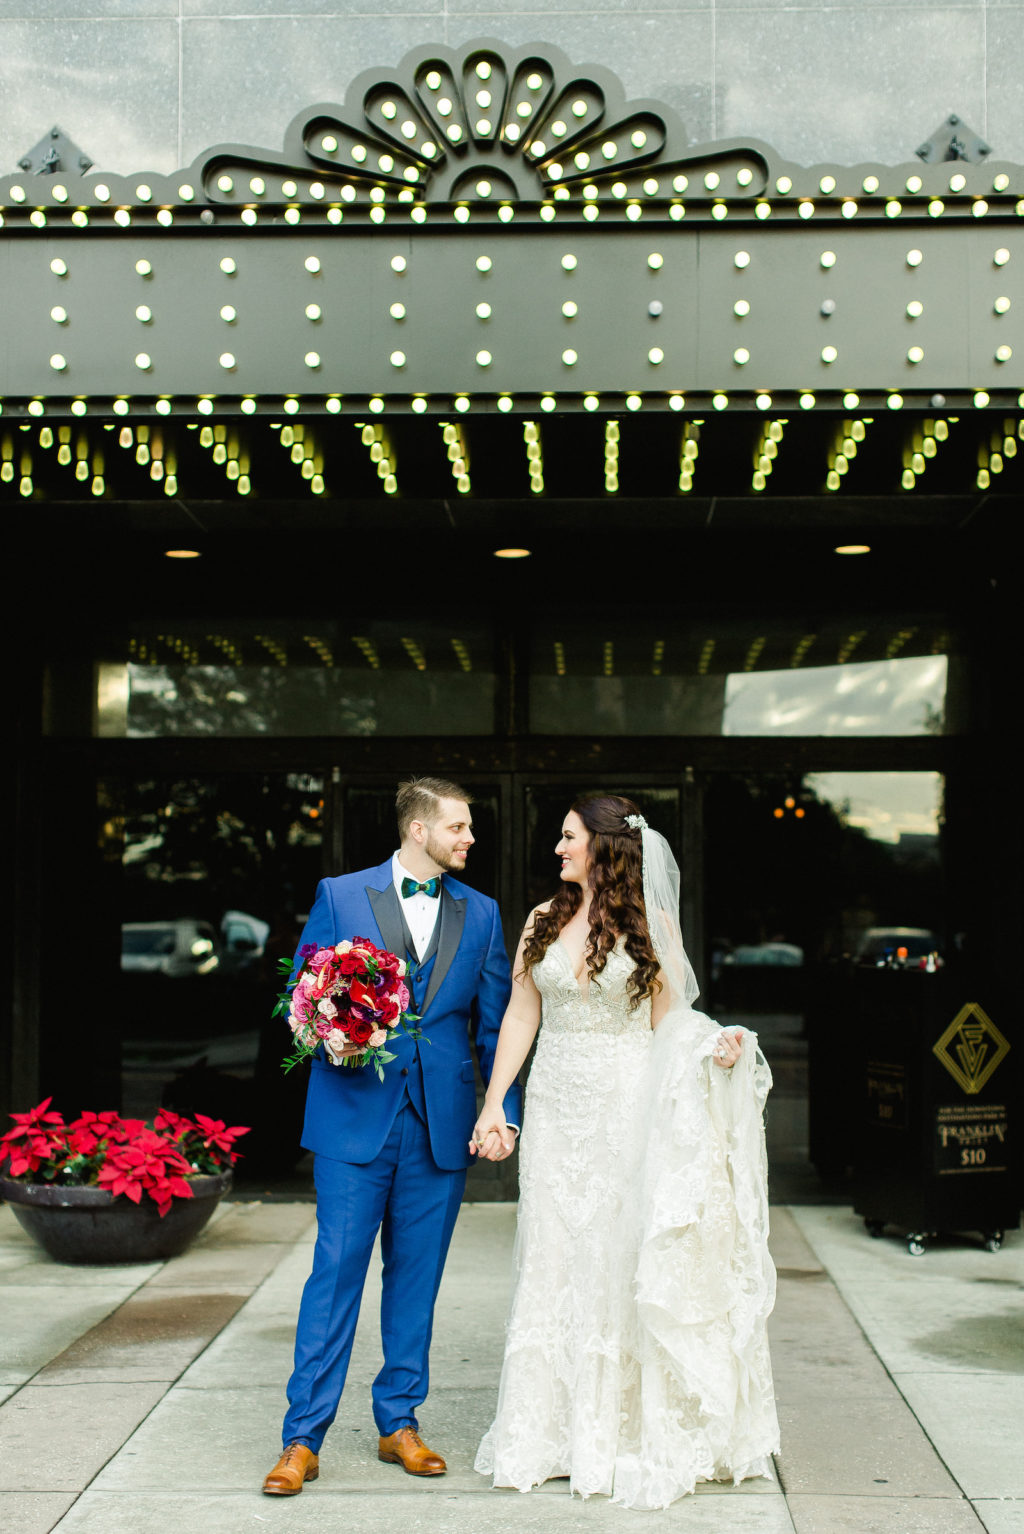 Bride and Groom Outdoor Downtown Tampa Wedding Portrait at Tampa Theater Marquis | Groom in Blue Suit with Black Satin Lapel | Rhinestone Embroidered Wedding Dress Bridal Gown | Bright Colorful Red and Pink Wedding Bridal Bouquet